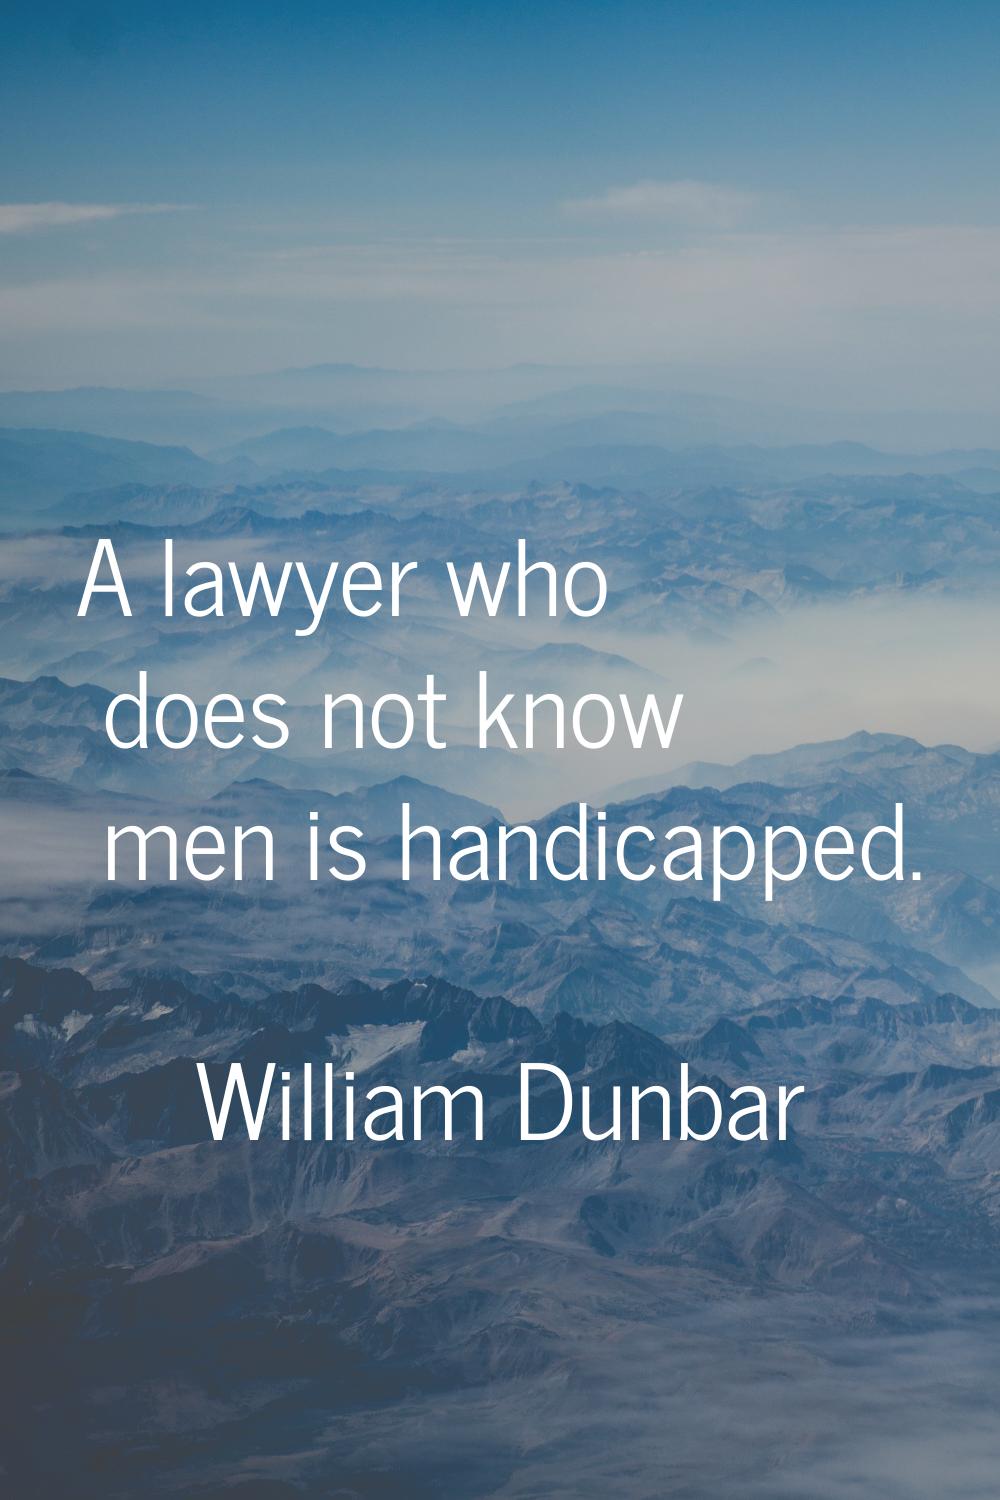 A lawyer who does not know men is handicapped.